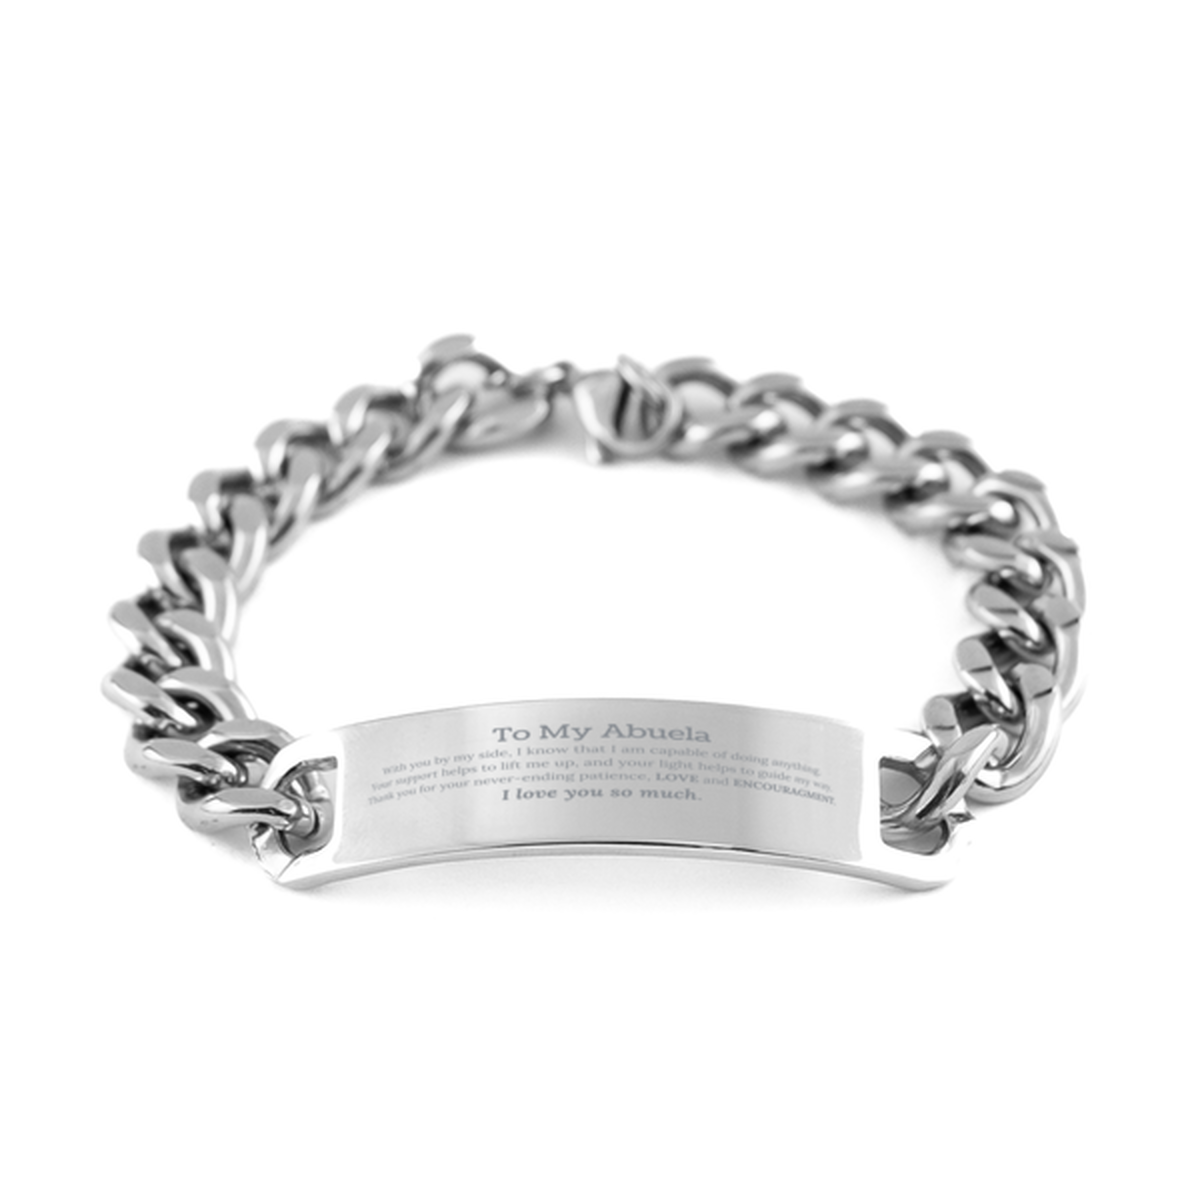 Appreciation Abuela Cuban Chain Stainless Steel Bracelet Gifts, To My Abuela Birthday Christmas Wedding Keepsake Gifts for Abuela With you by my side, I know that I am capable of doing anything. I love you so much